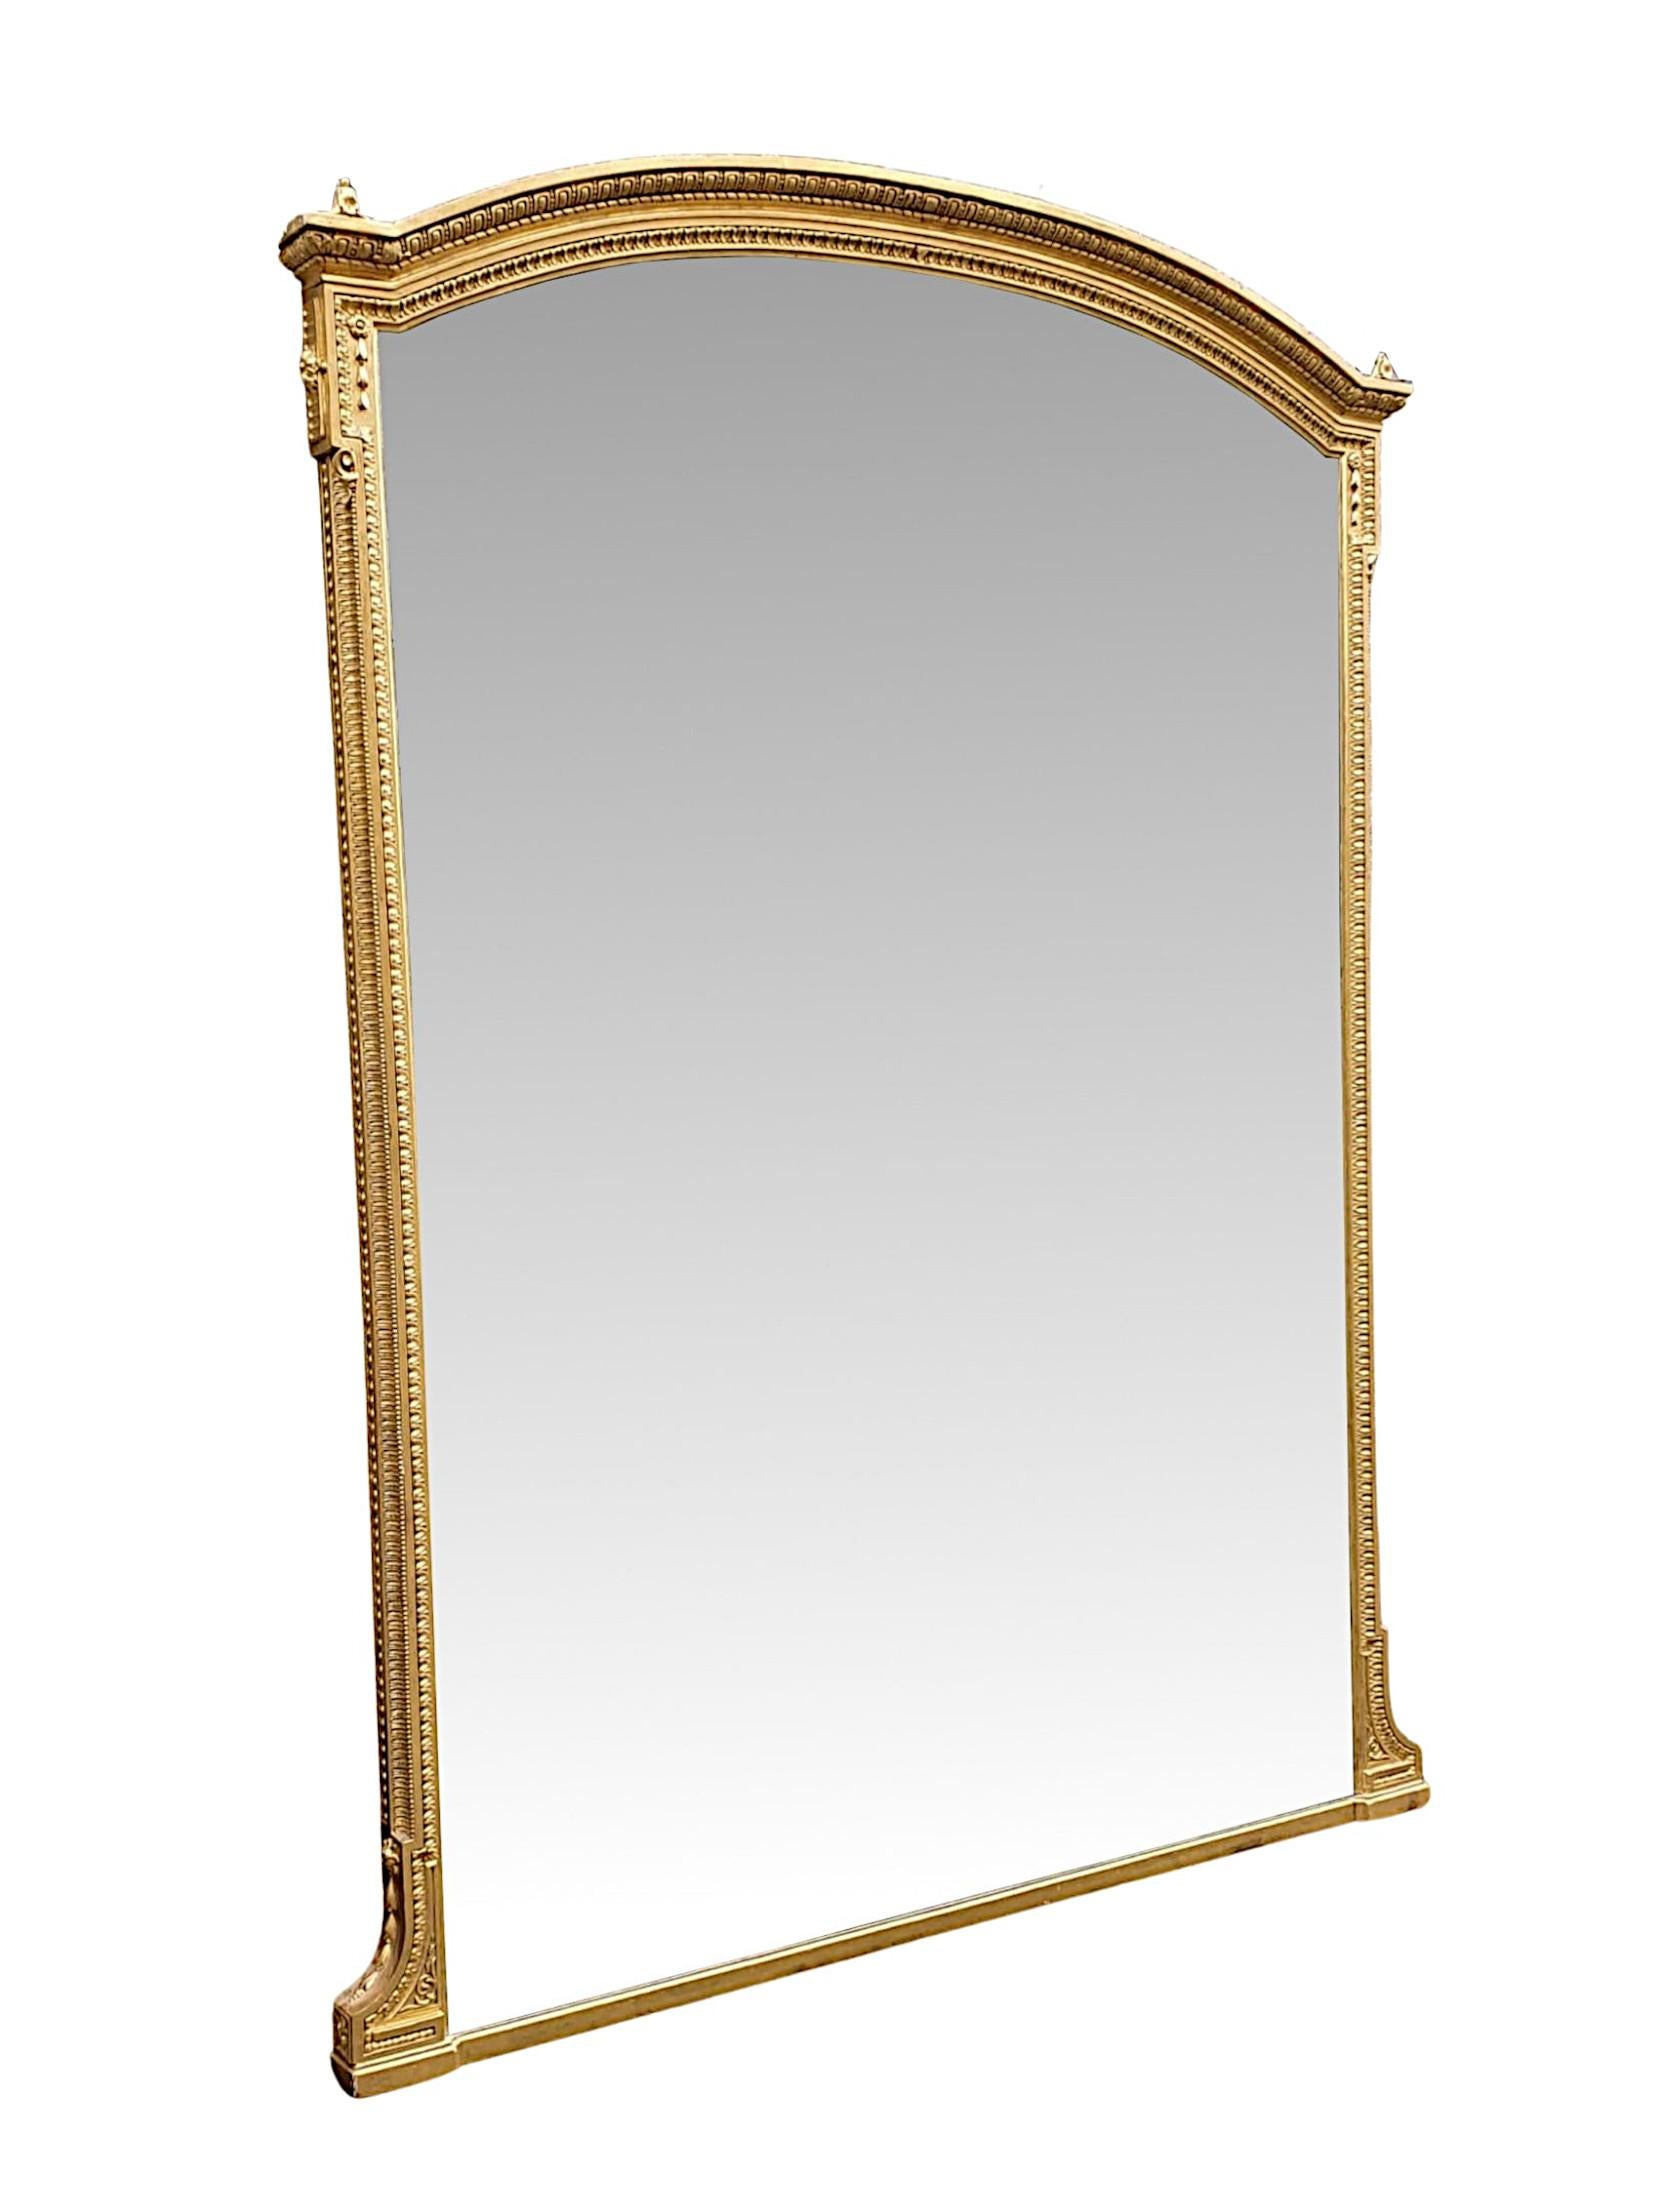 Scottish Very Fine and Rare 19th Century Overmantle Mirror by John Taylor & Son’s For Sale